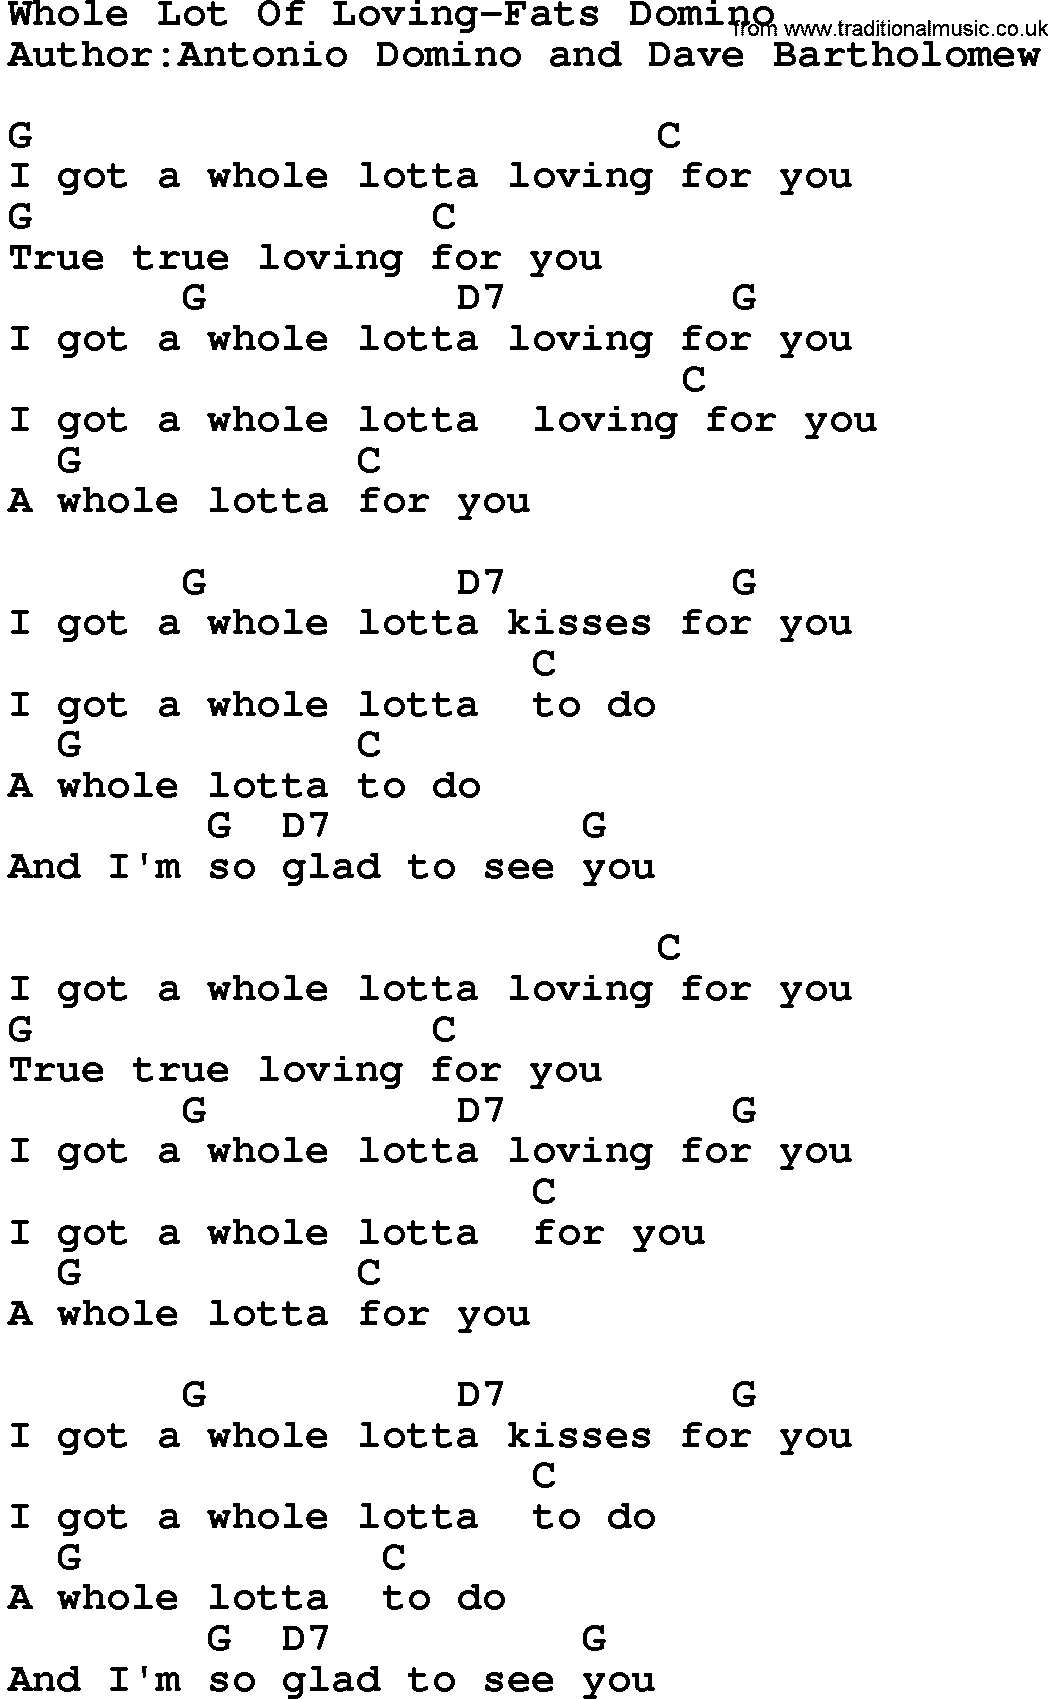 Country music song: Whole Lot Of Loving-Fats Domino lyrics and chords